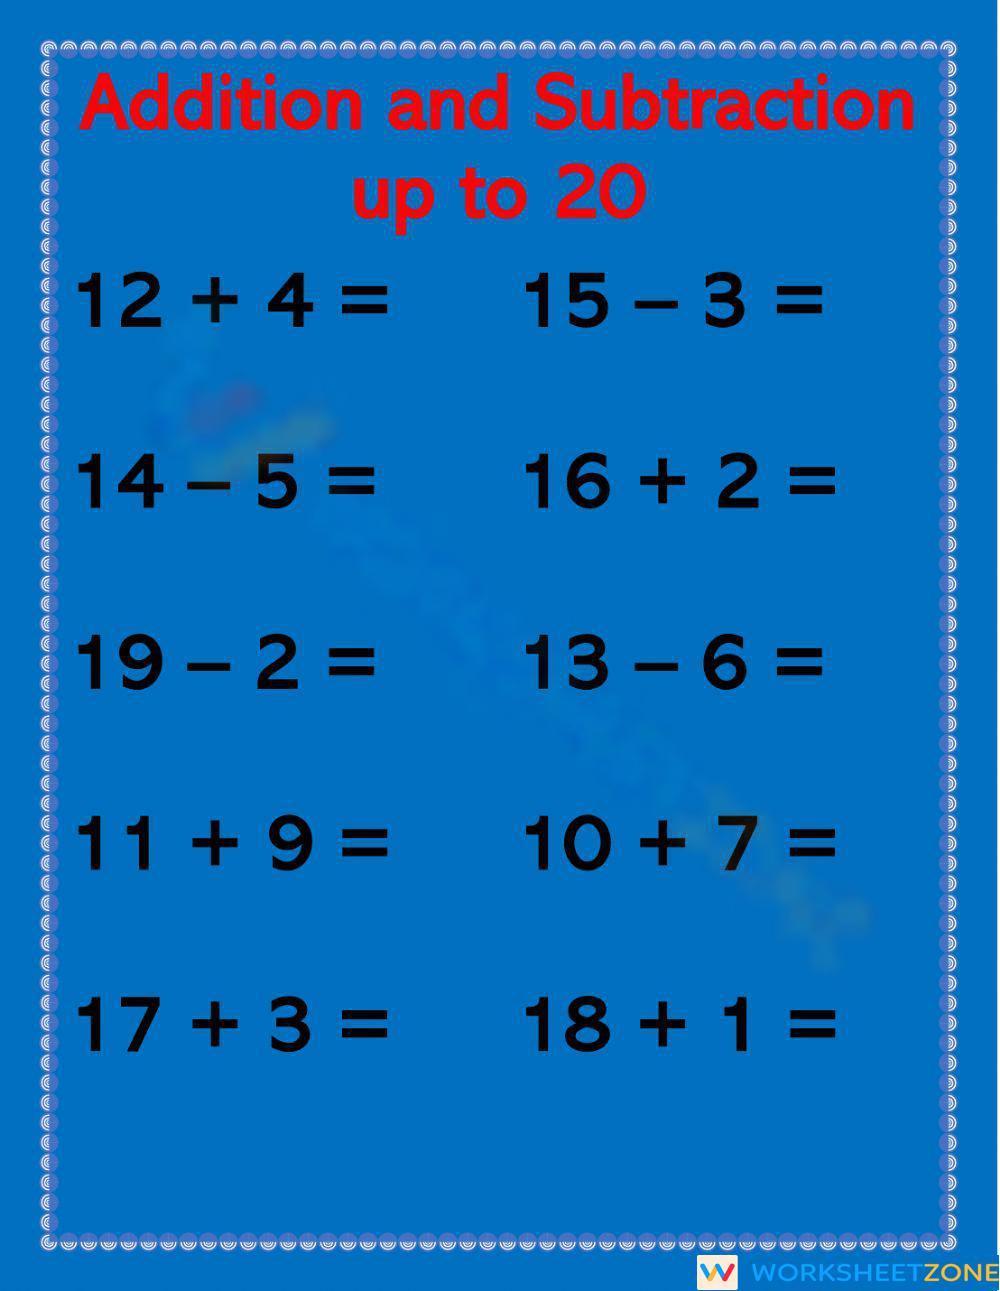 addition-and-subtraction-to-20-worksheet-zone